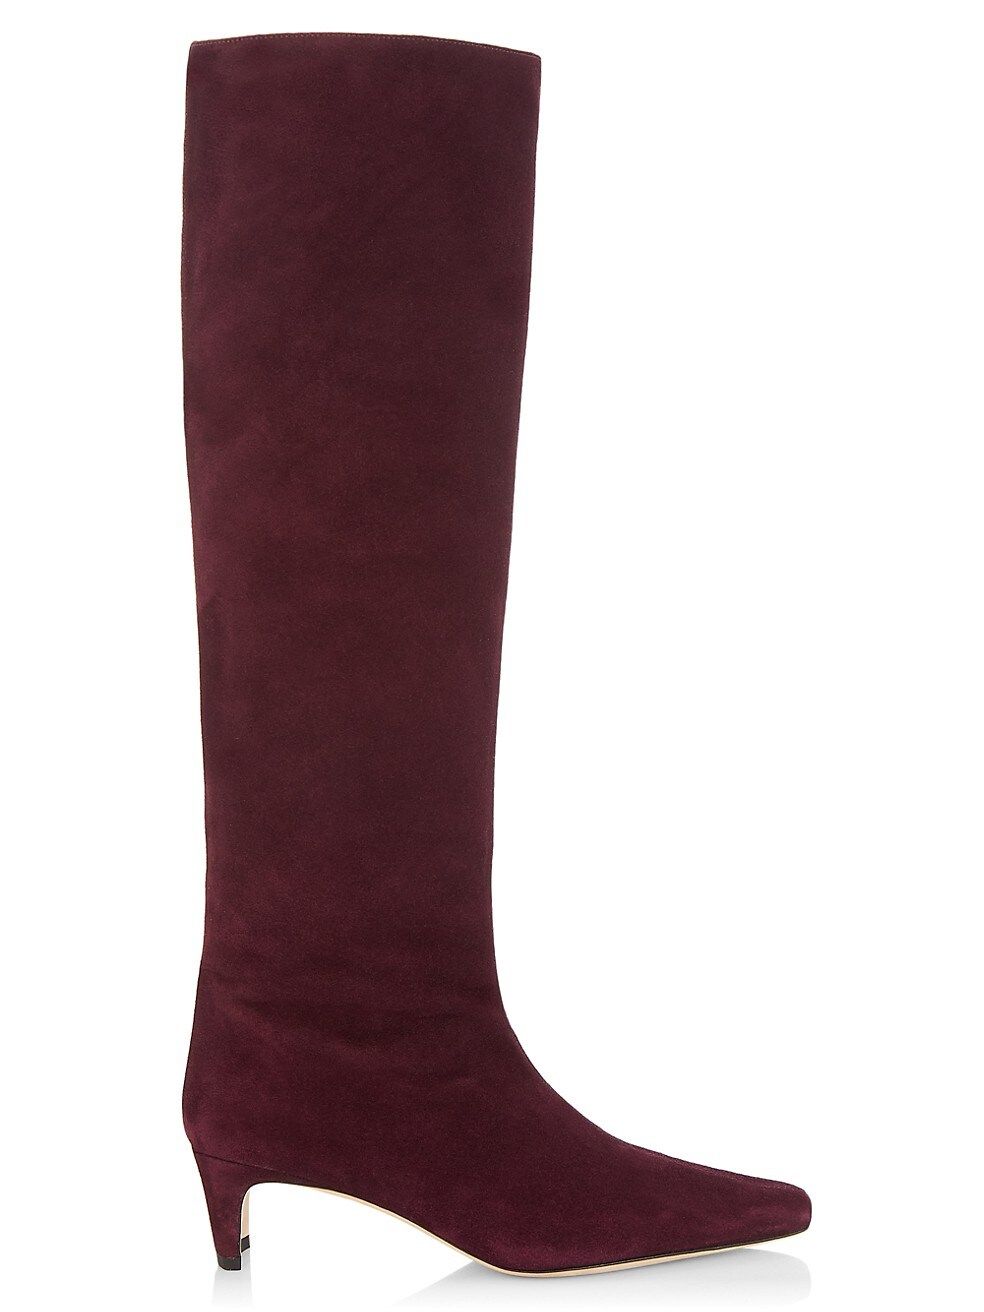 Wally Suede Knee-High Boots | Saks Fifth Avenue